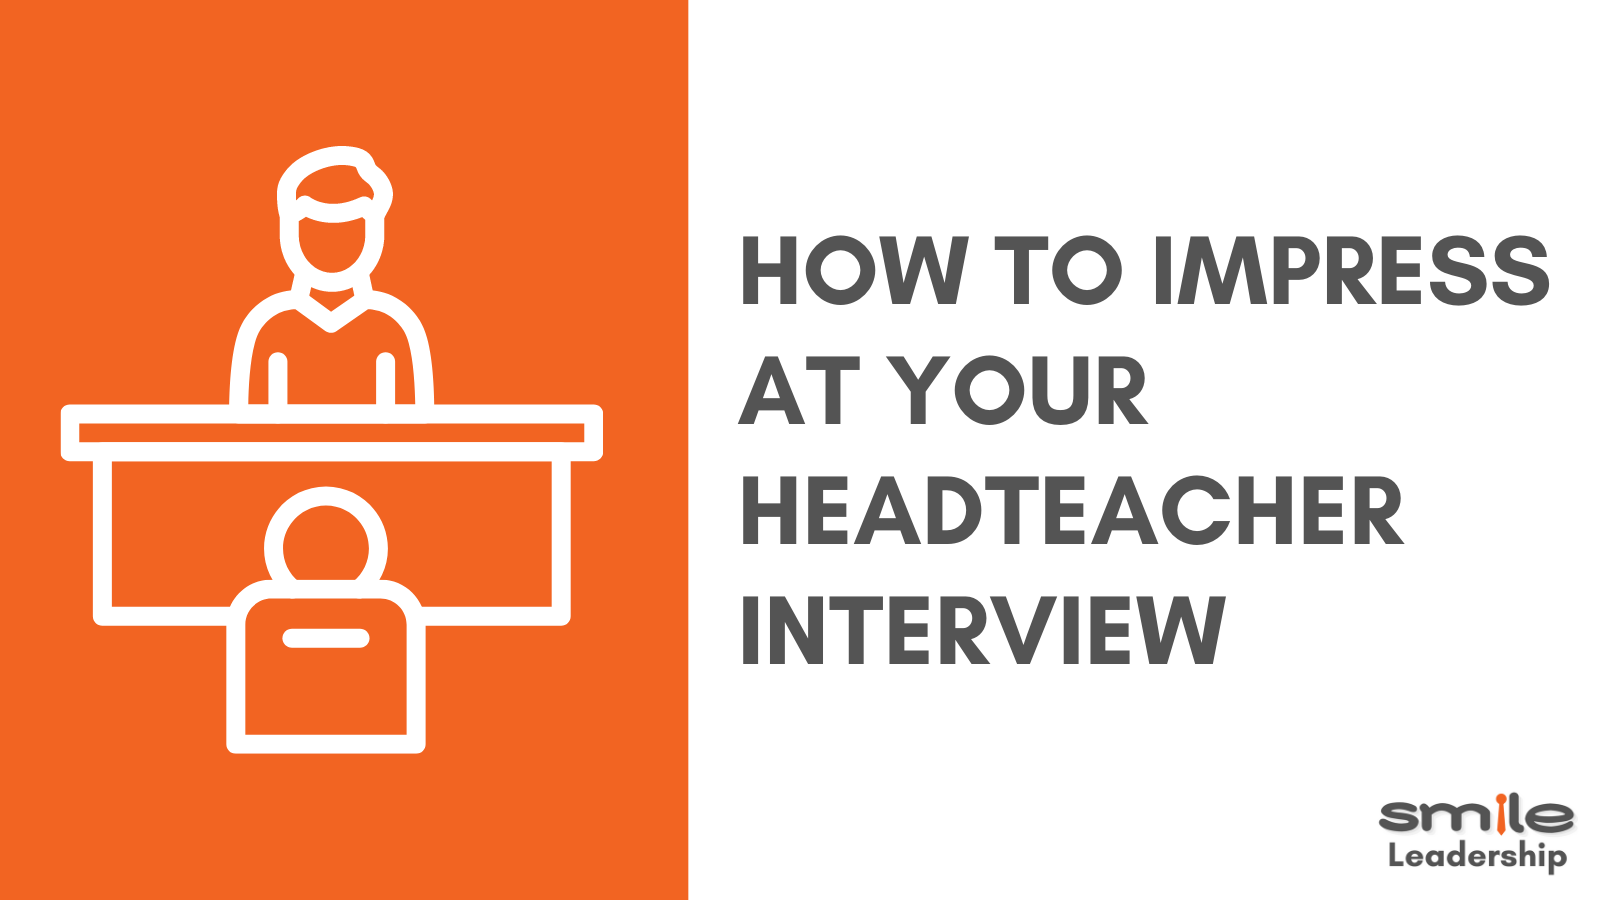 How to Impress in your Headteacher Interview